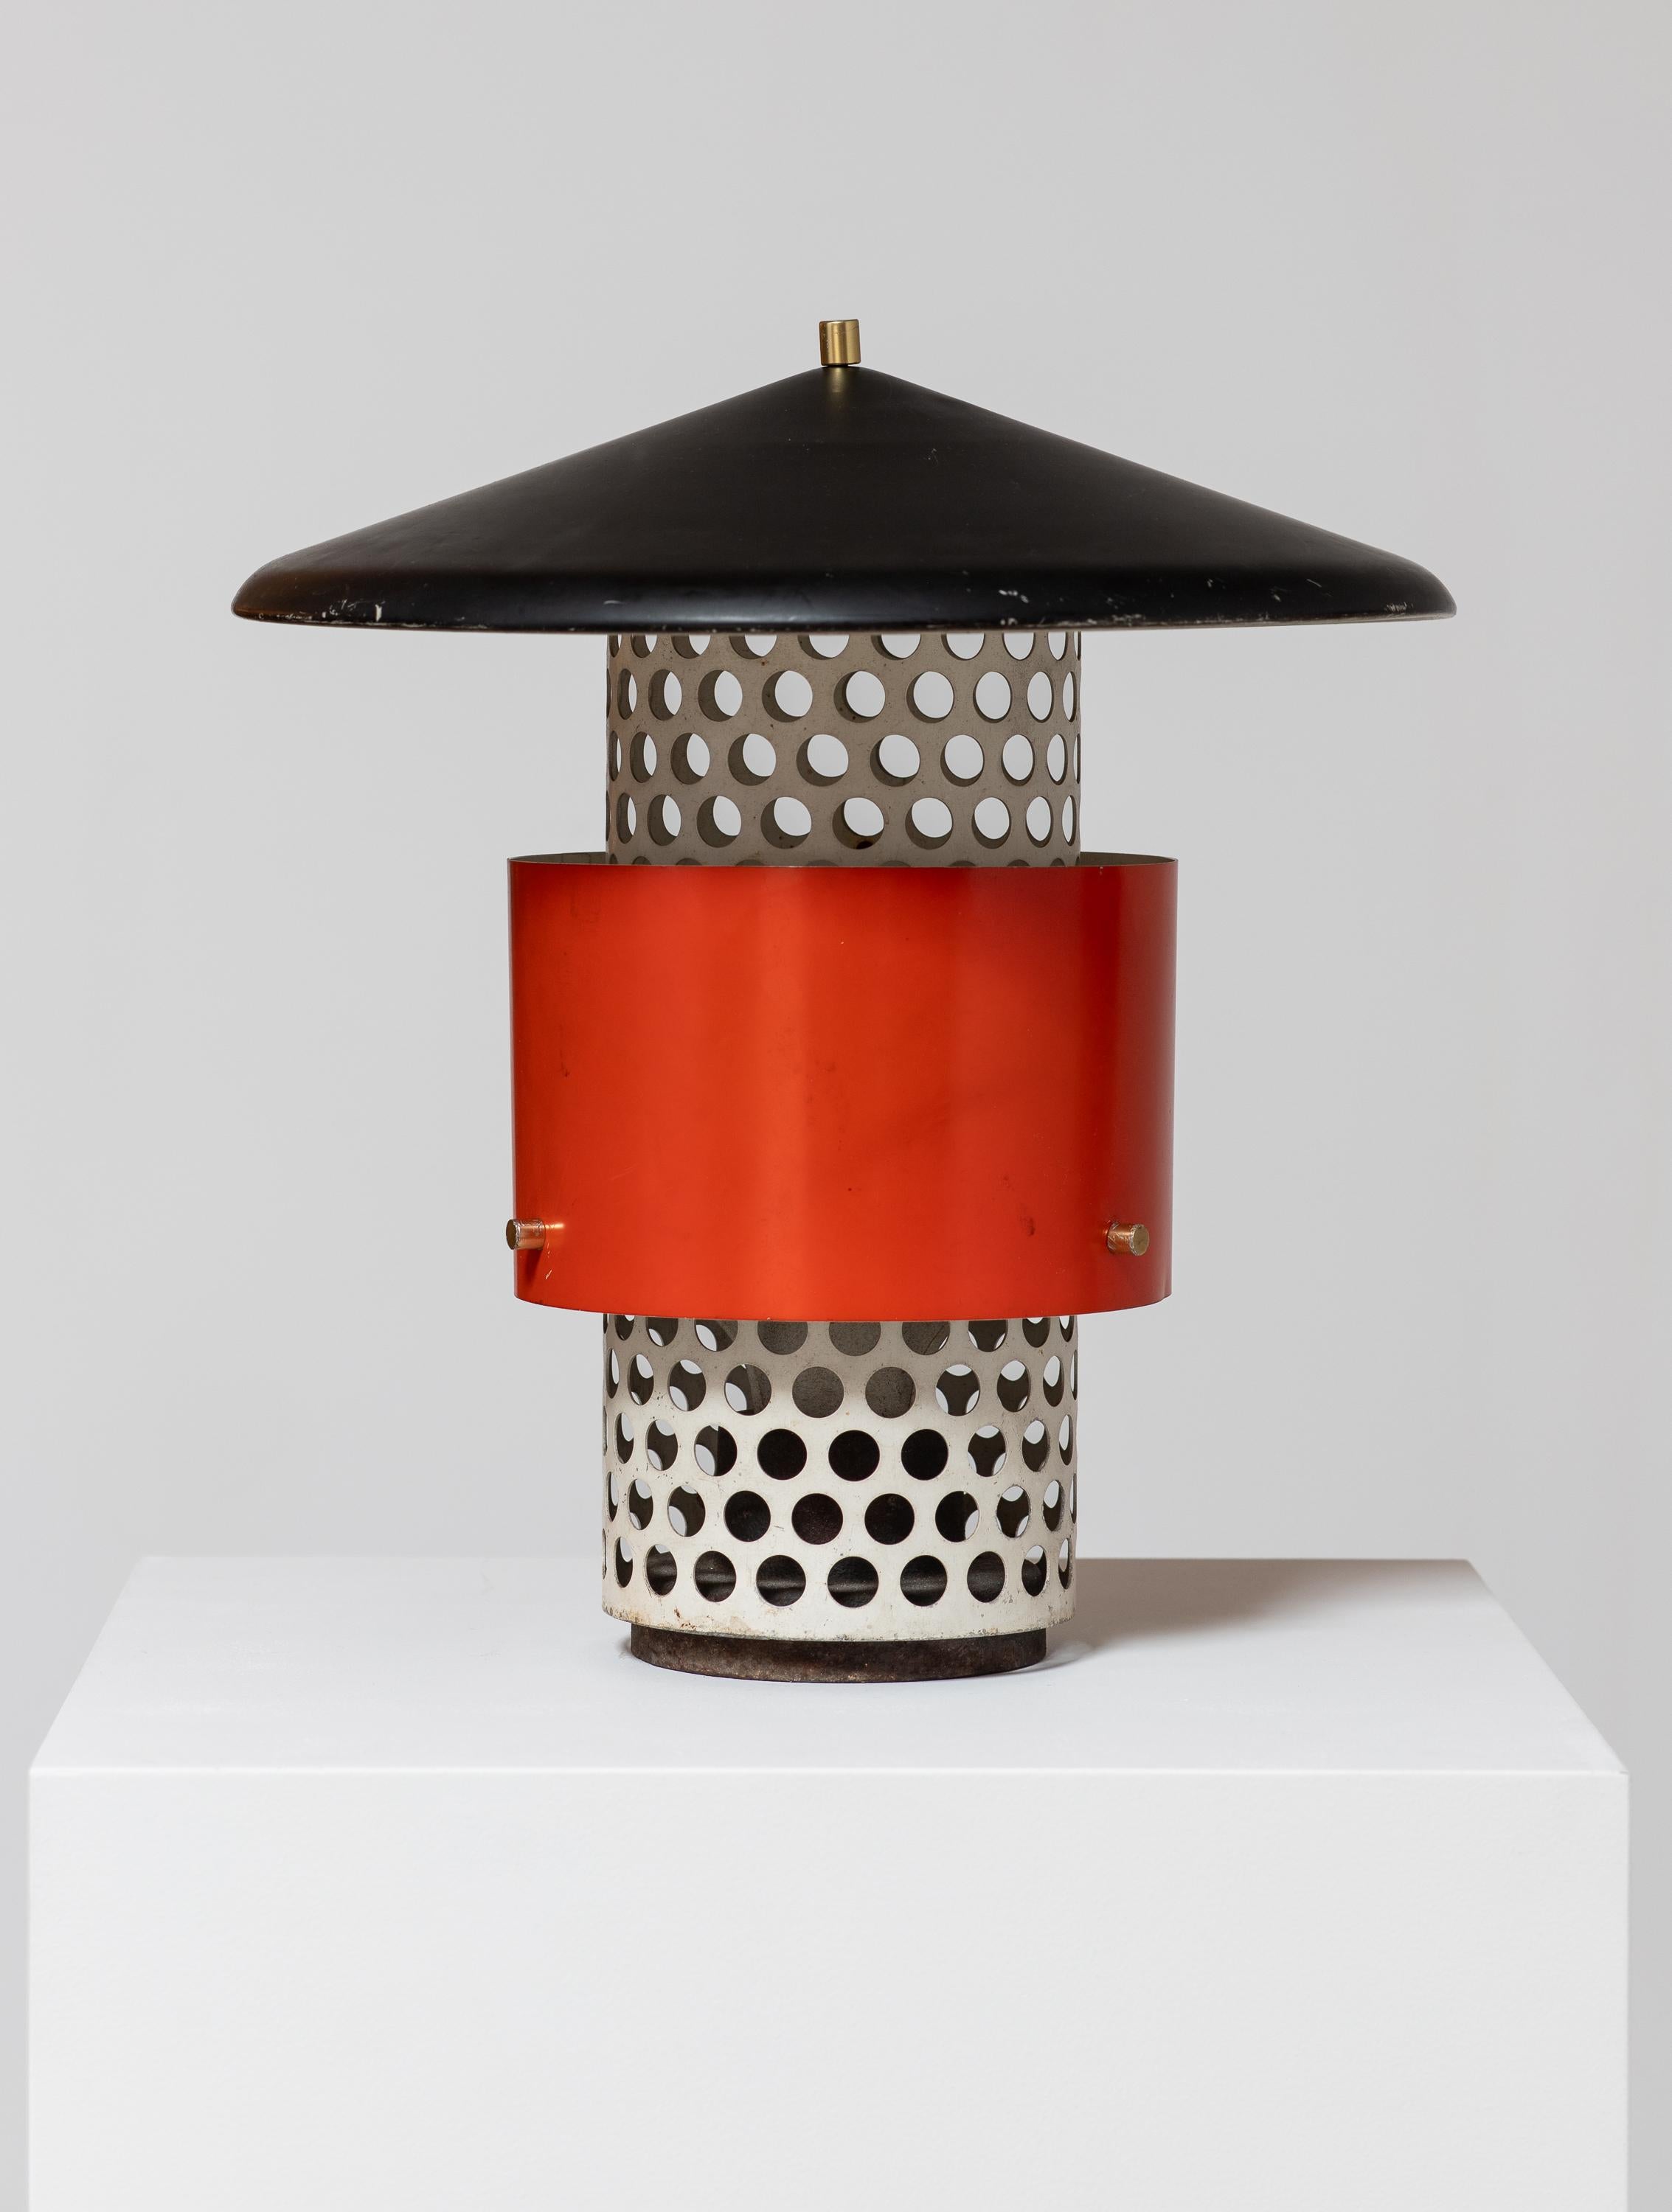 American Lightolier Lytescape Perforated Metal Outdoor Lanterns or Lamps For Sale